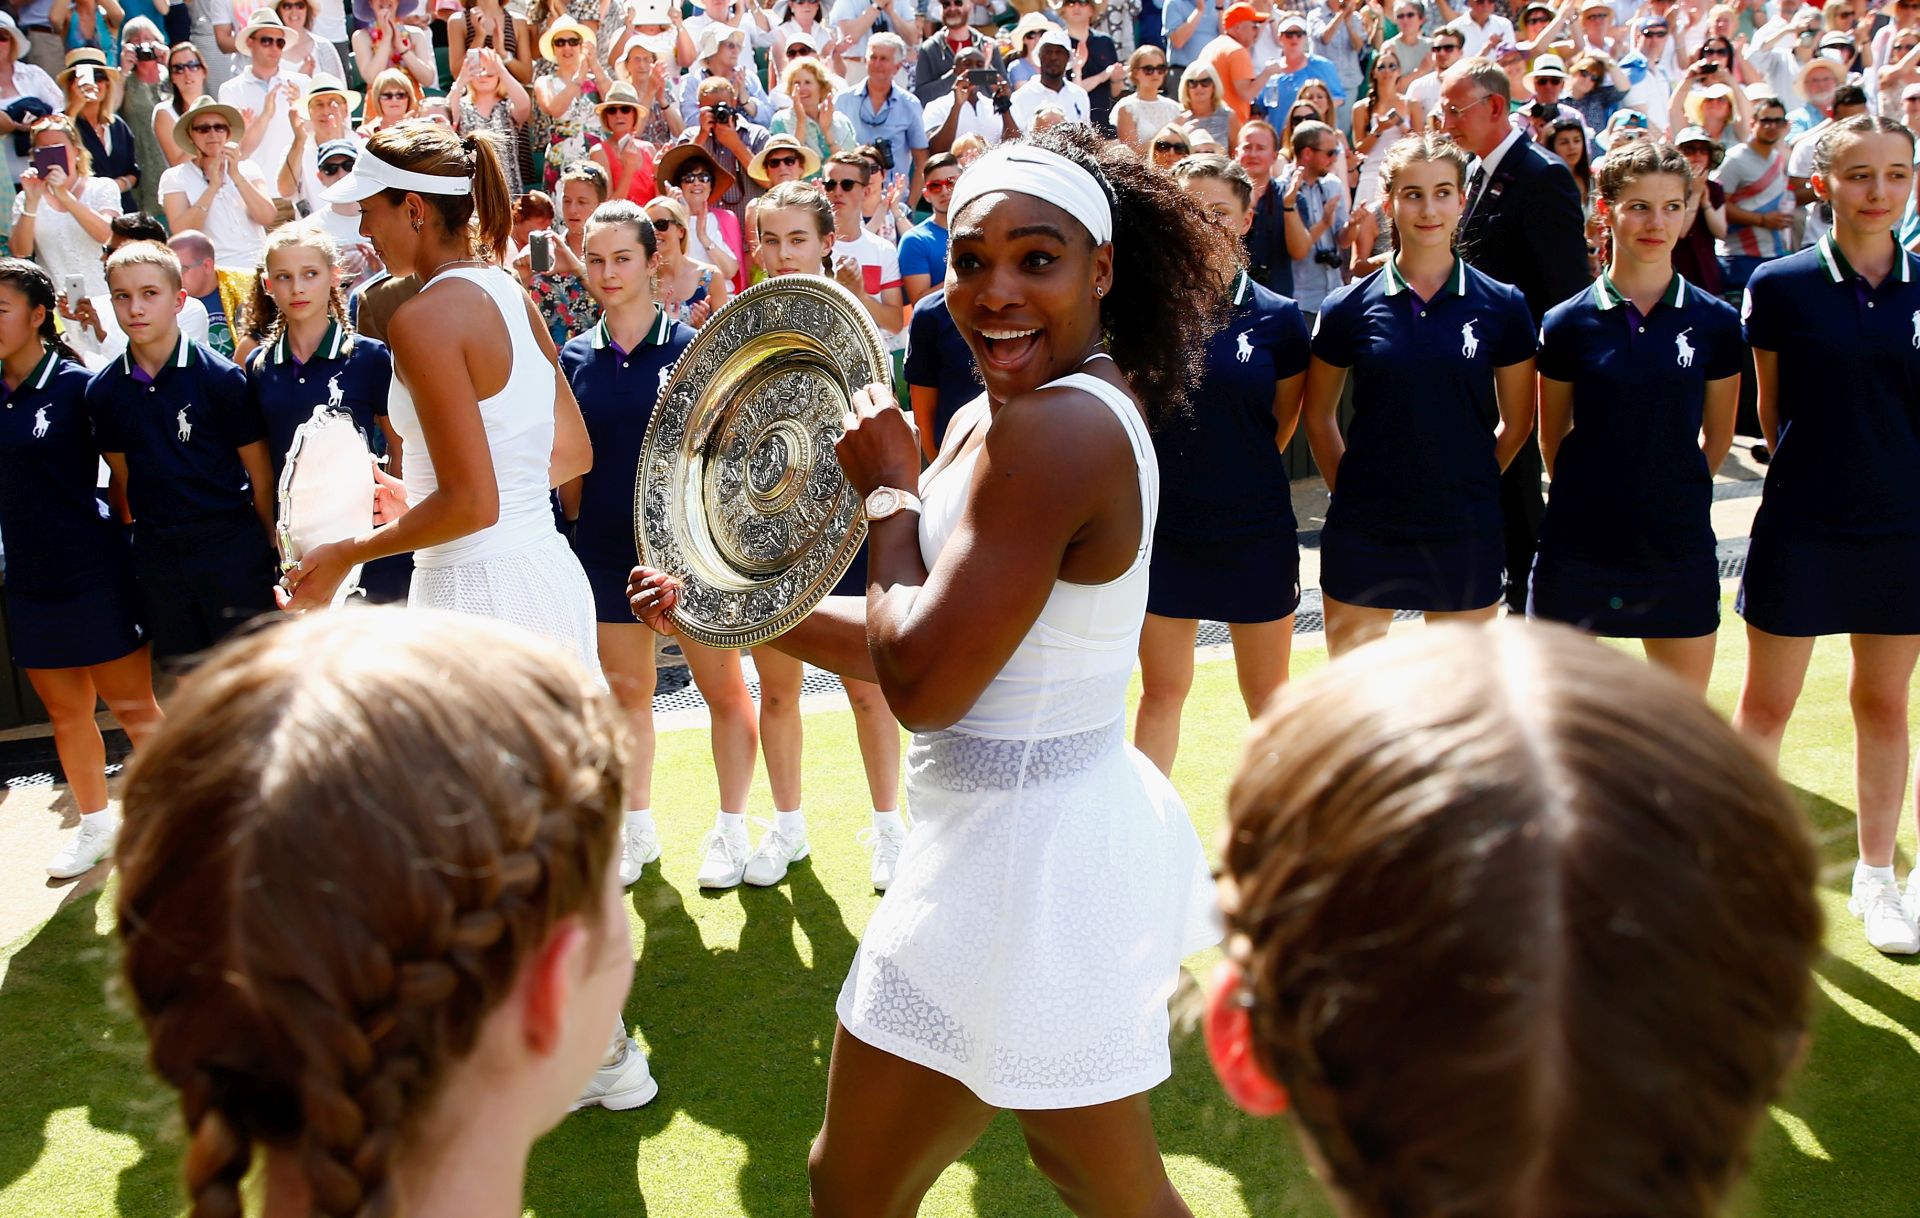 LONDON, ENGLAND - JULY 11:  Serena Williams of the United States leaves court with the Venus Rosewater Dish after her victory in the Final Of The Ladies' Singles against Garbine Muguruza of Spain during day twelve of the Wimbledon Lawn Tennis Championships at the All England Lawn Tennis and Croquet Club on July 11, 2015 in London, England.  (Photo by 